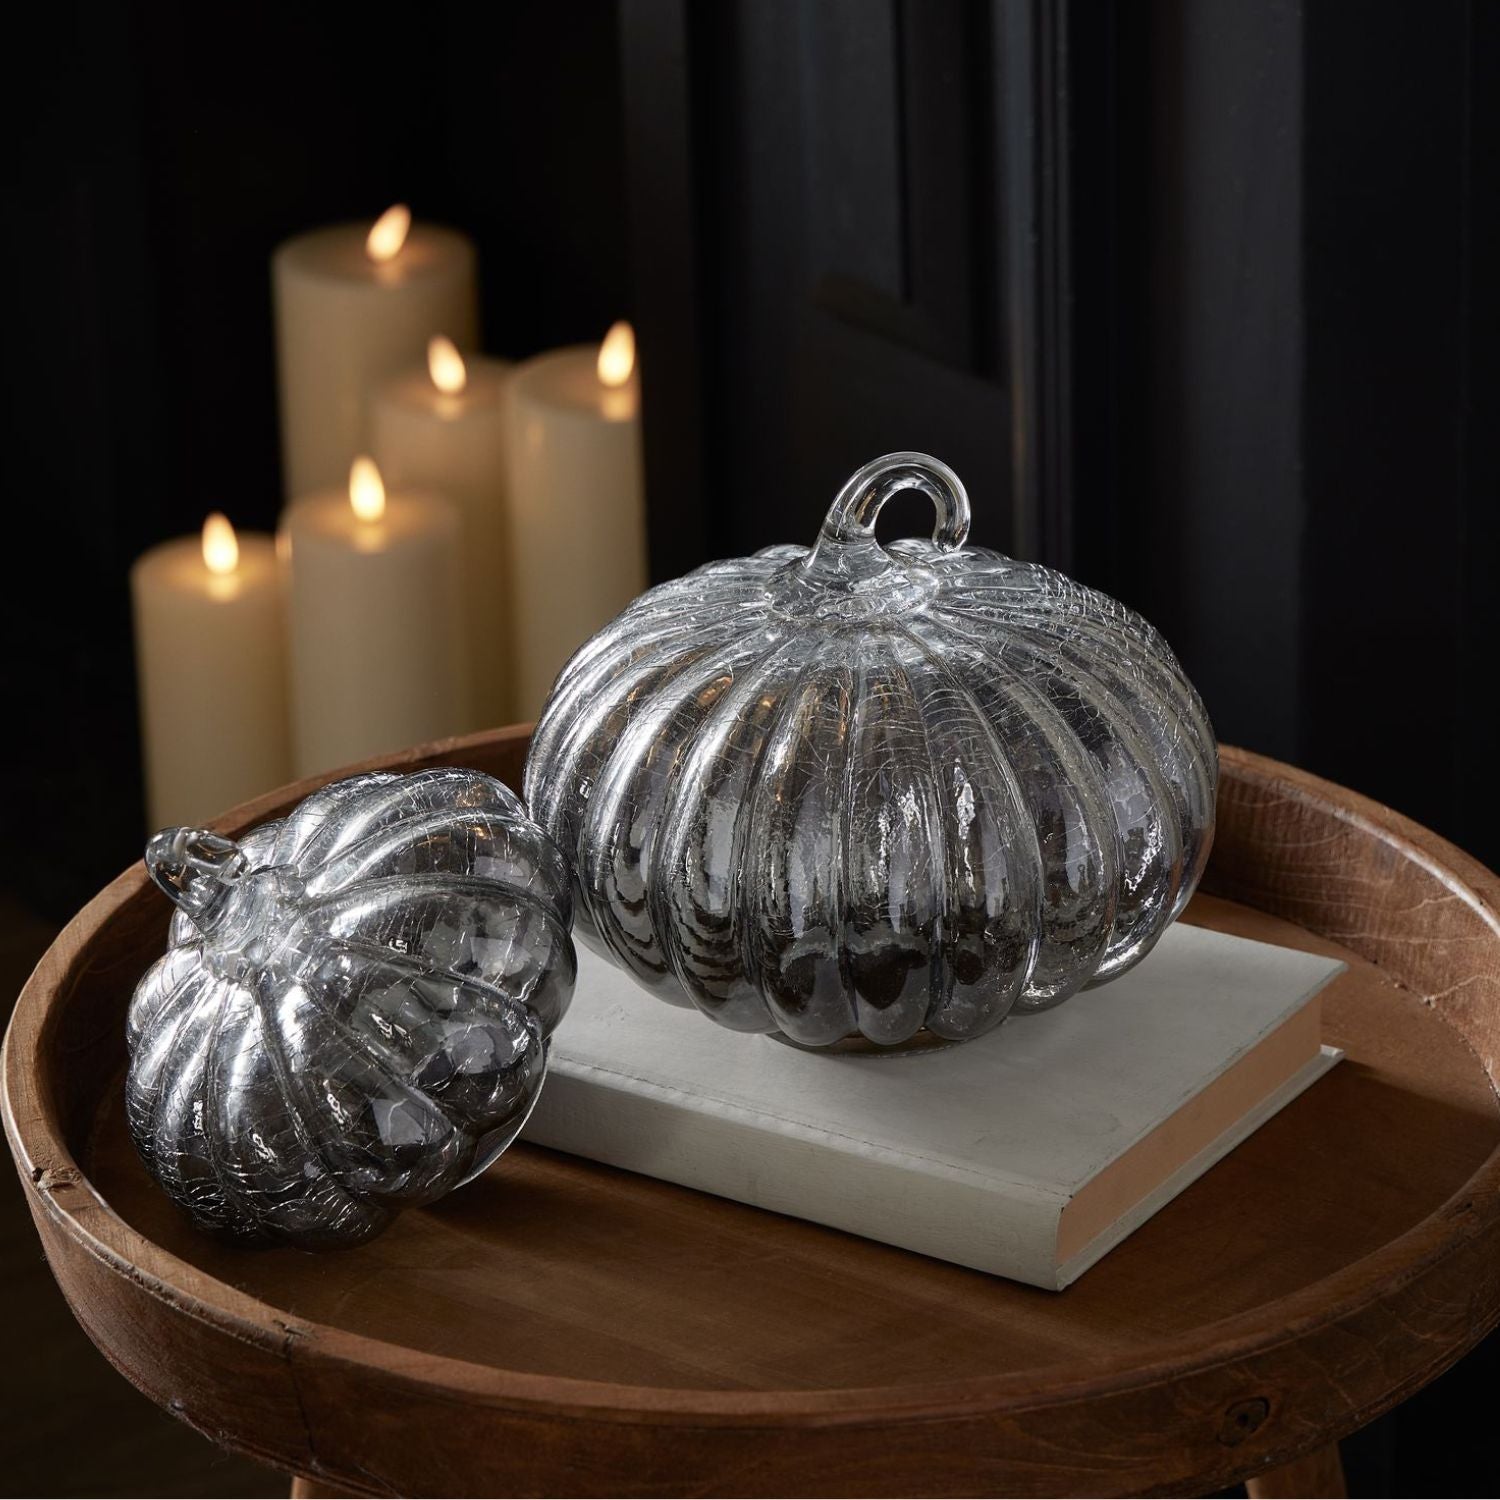 Large Pumpkin made of smoked glass for Autumnal and Halloween displays